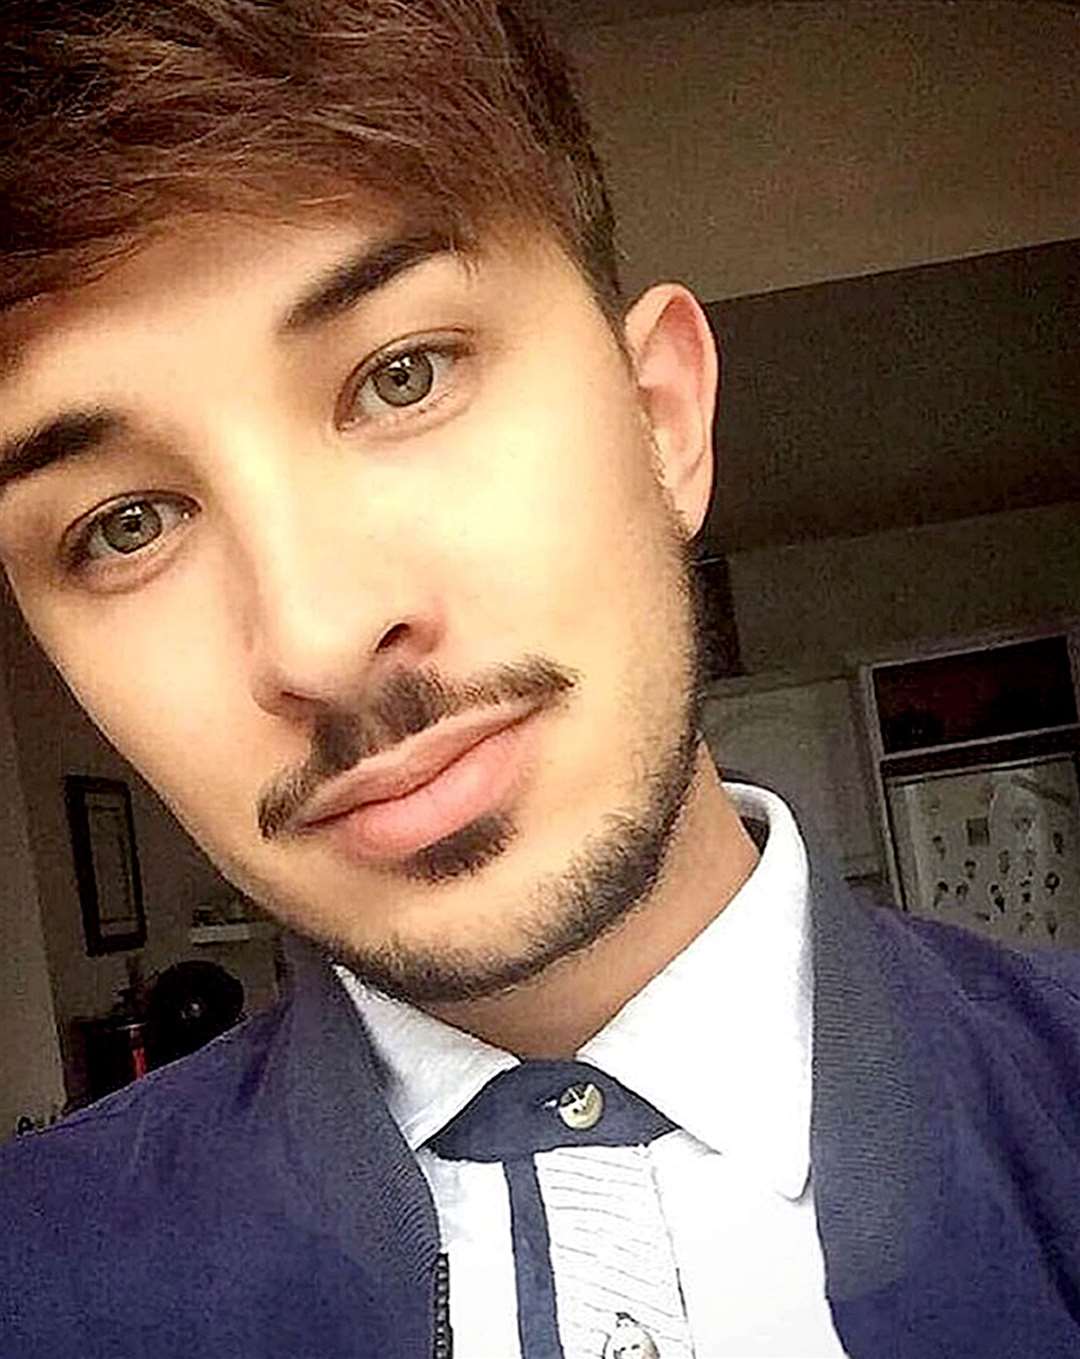 Martyn Hett was one of 22 people killed in the Manchester Arena bombing (family handout/PA)